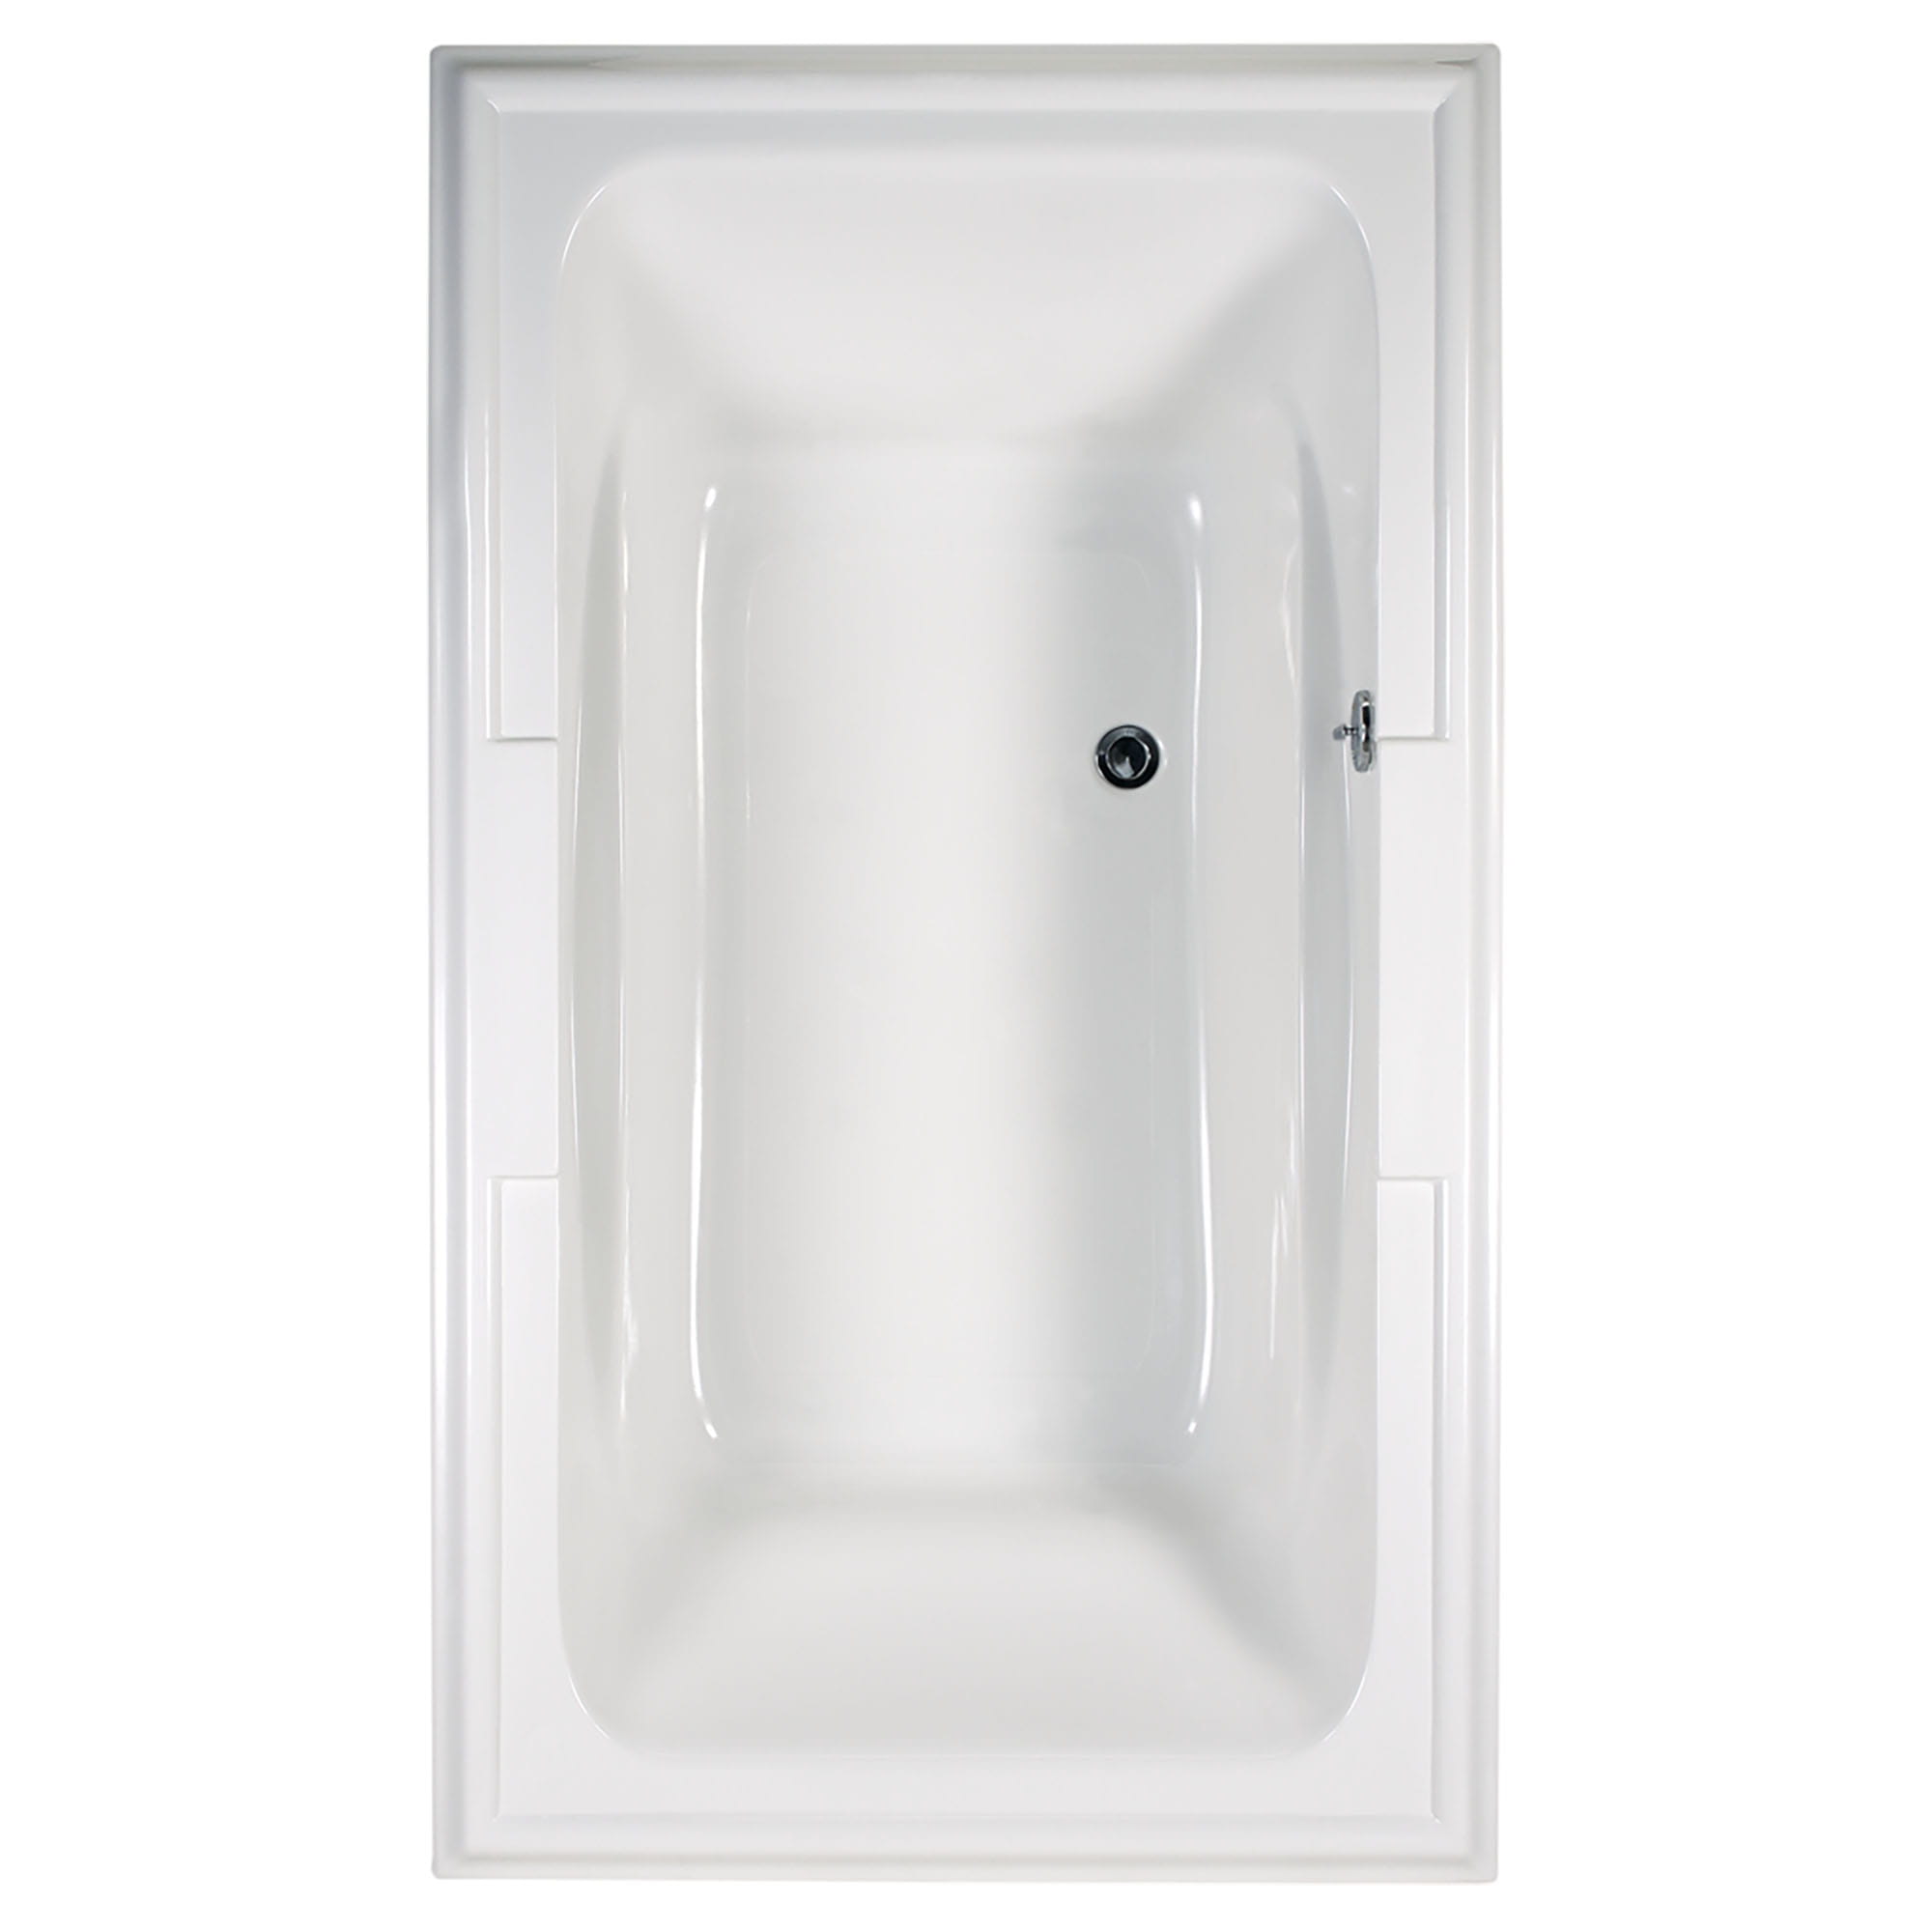 Town Square® 60 x 42-Inch Drop-In Bathtub With EcoSilent® EverClean® Hydromassage System